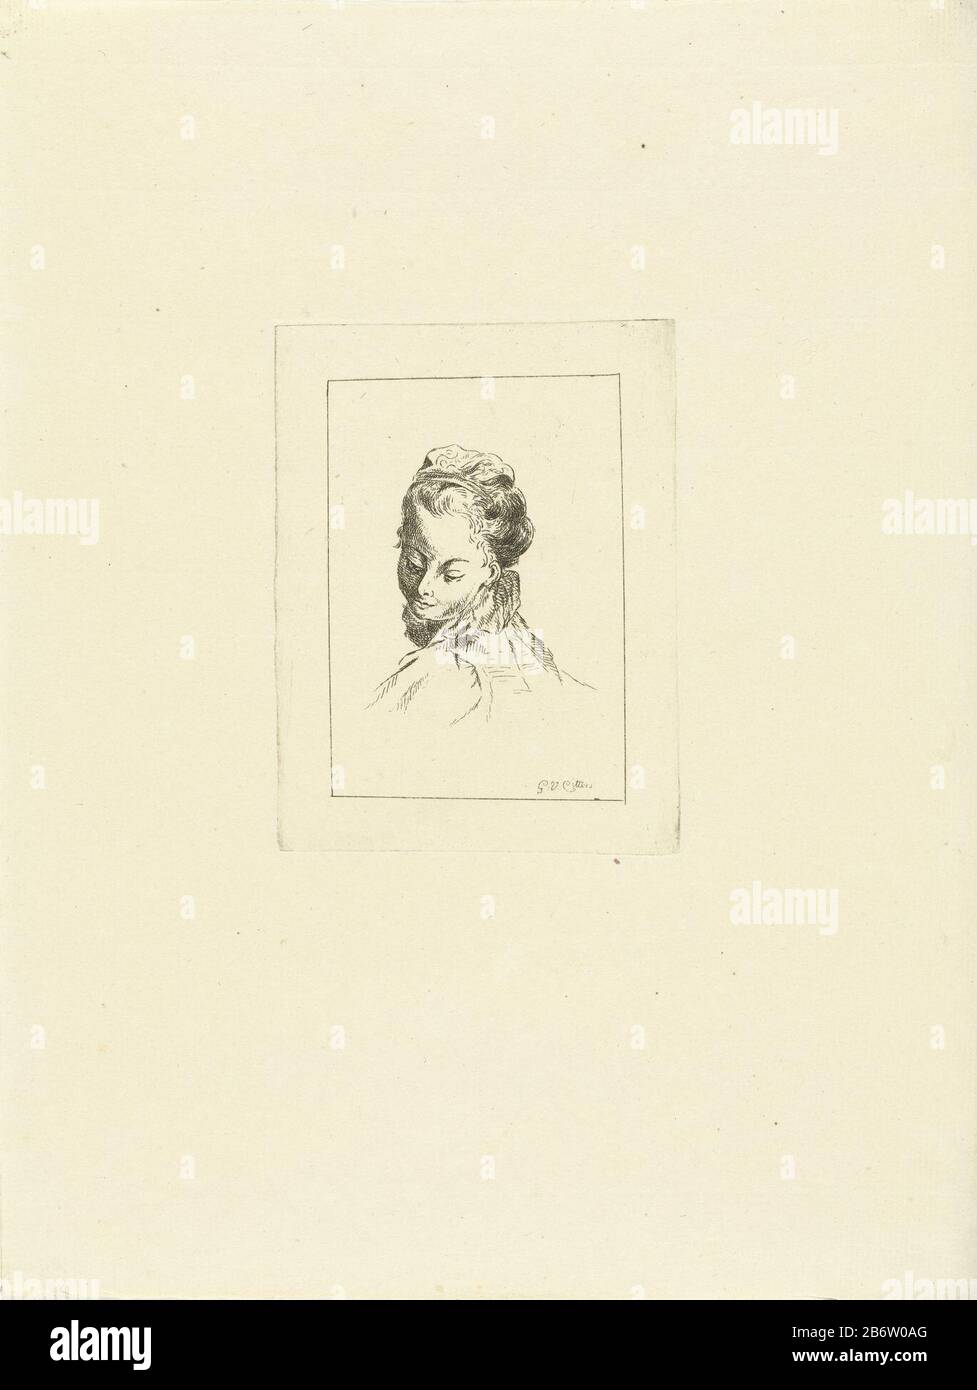 Hoofdstudie van een jonge vrouw met haarband Head Study of a young woman with her band object type: picture Item number: RP-P-1917-392 Inscriptions / Brands: collector's mark, verso, stamped: Lugt 2233 Manufacturer : printmaker: G. van Citters (listed property) Place manufacture : the Netherlands Date: ca. 1750 - ca. 1800 Physical characteristics: etching material: paper Technique: etching dimensions: plate edge: h 120 mm × b 90 mm Subject: anonymous historical person Portrayed alone - BB - woman Stock Photo